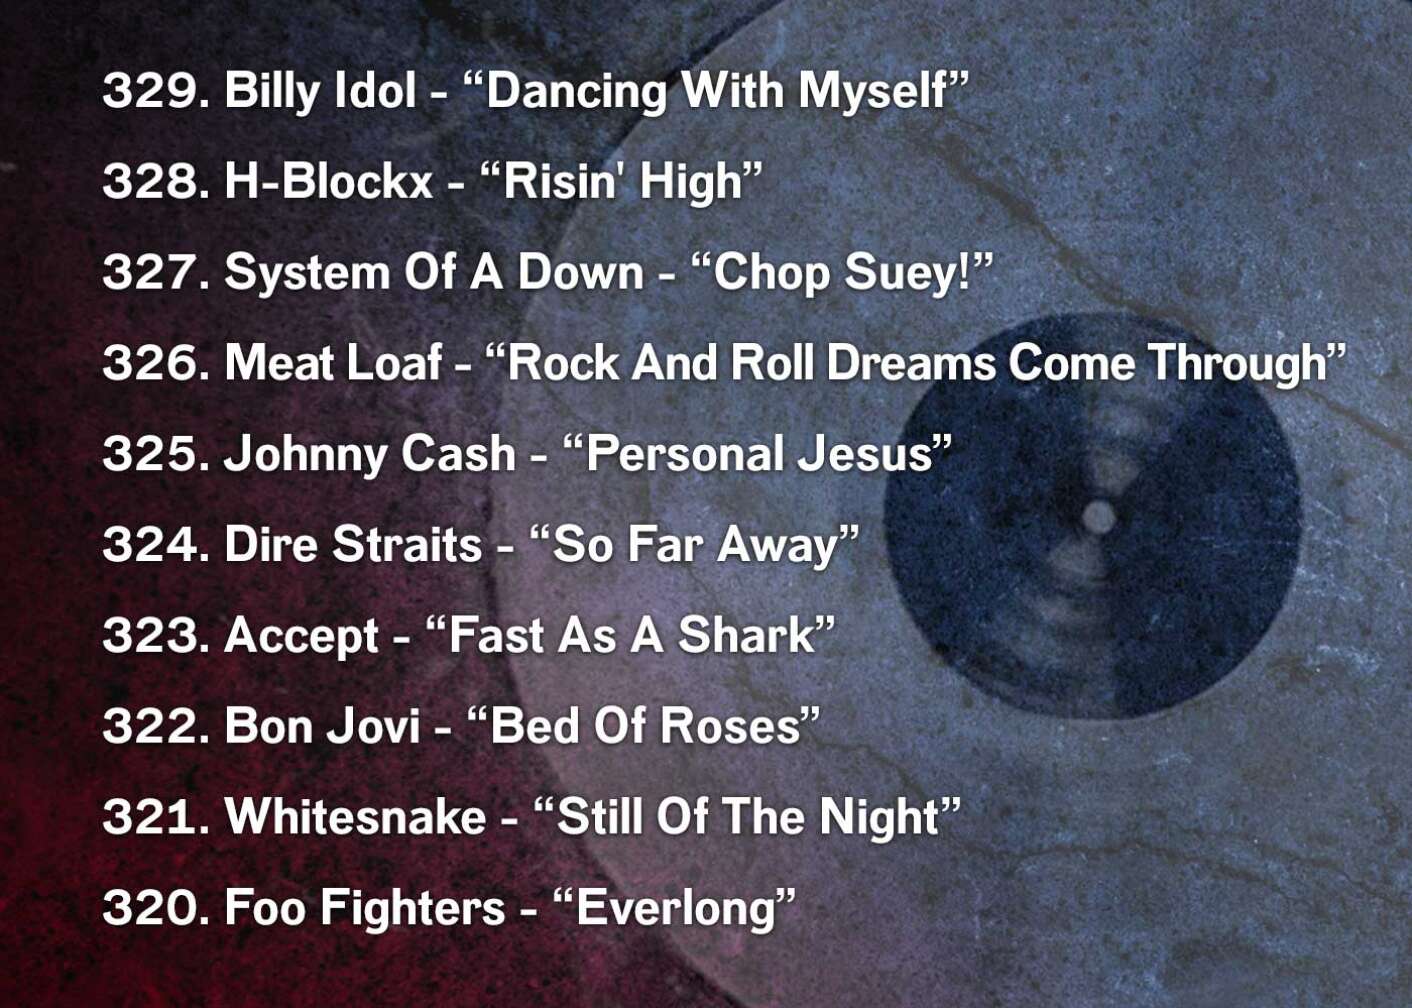 329. Billy Idol - “Dancing With Myself” 328. H-Blockx - “Risin' High” 327. System Of A Down - “Chop Suey!” 326. Meat Loaf - “Rock And Roll Dreams Come Through” 325. Johnny Cash - “Personal Jesus” 324. Dire Straits - “So Far Away” 323. Accept - “Fast As A Shark” 322. Bon Jovi - “Bed Of Roses” 321. Whitesnake - “Still Of The Night” 320. Foo Fighters - “Everlong”